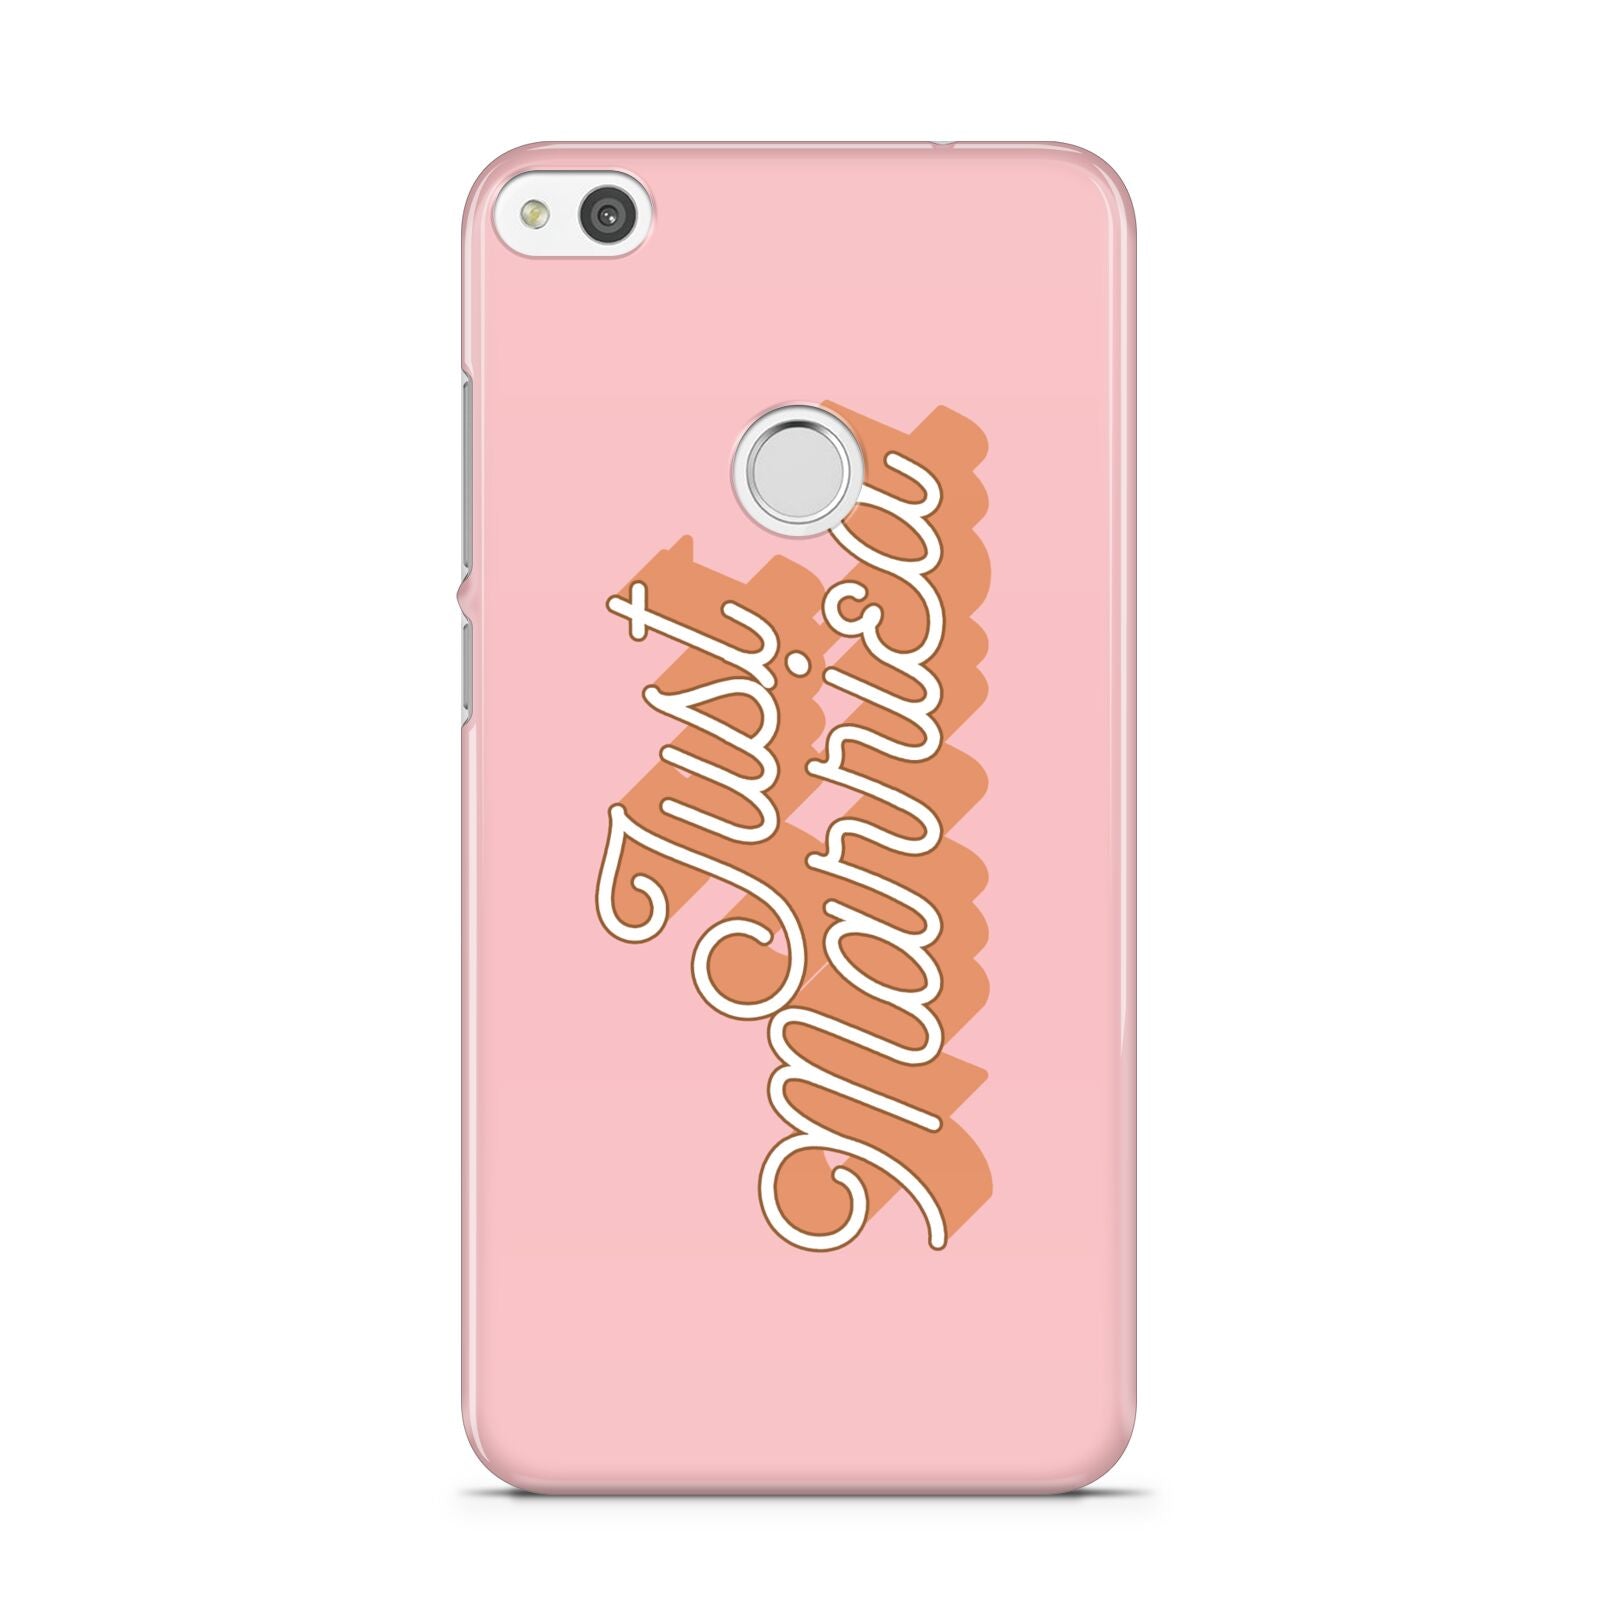 Just Married Pink Huawei P8 Lite Case